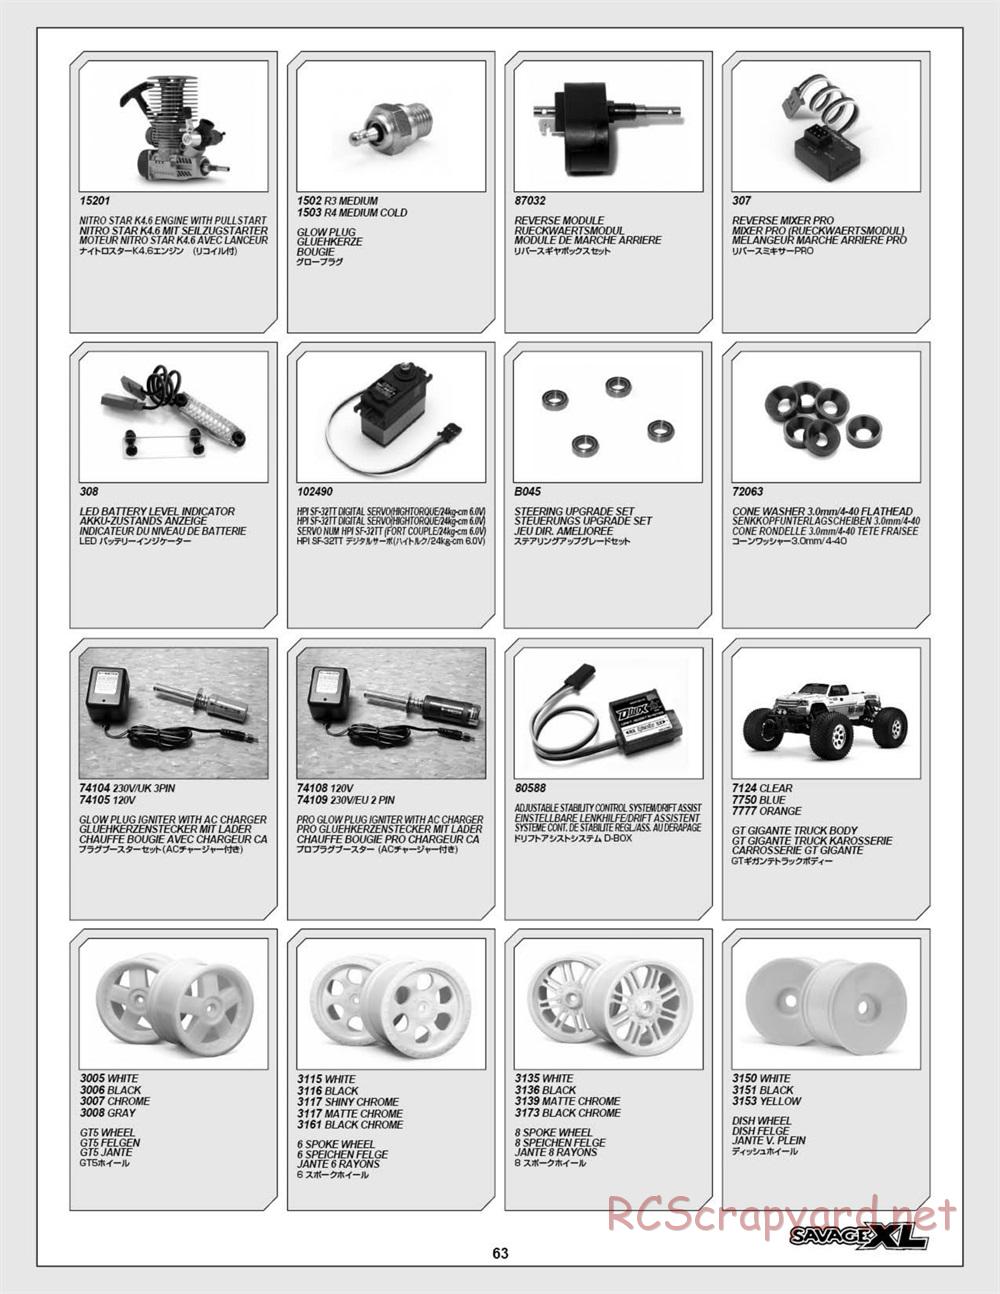 HPI - Savage XL 5.9 - Exploded View - Page 63